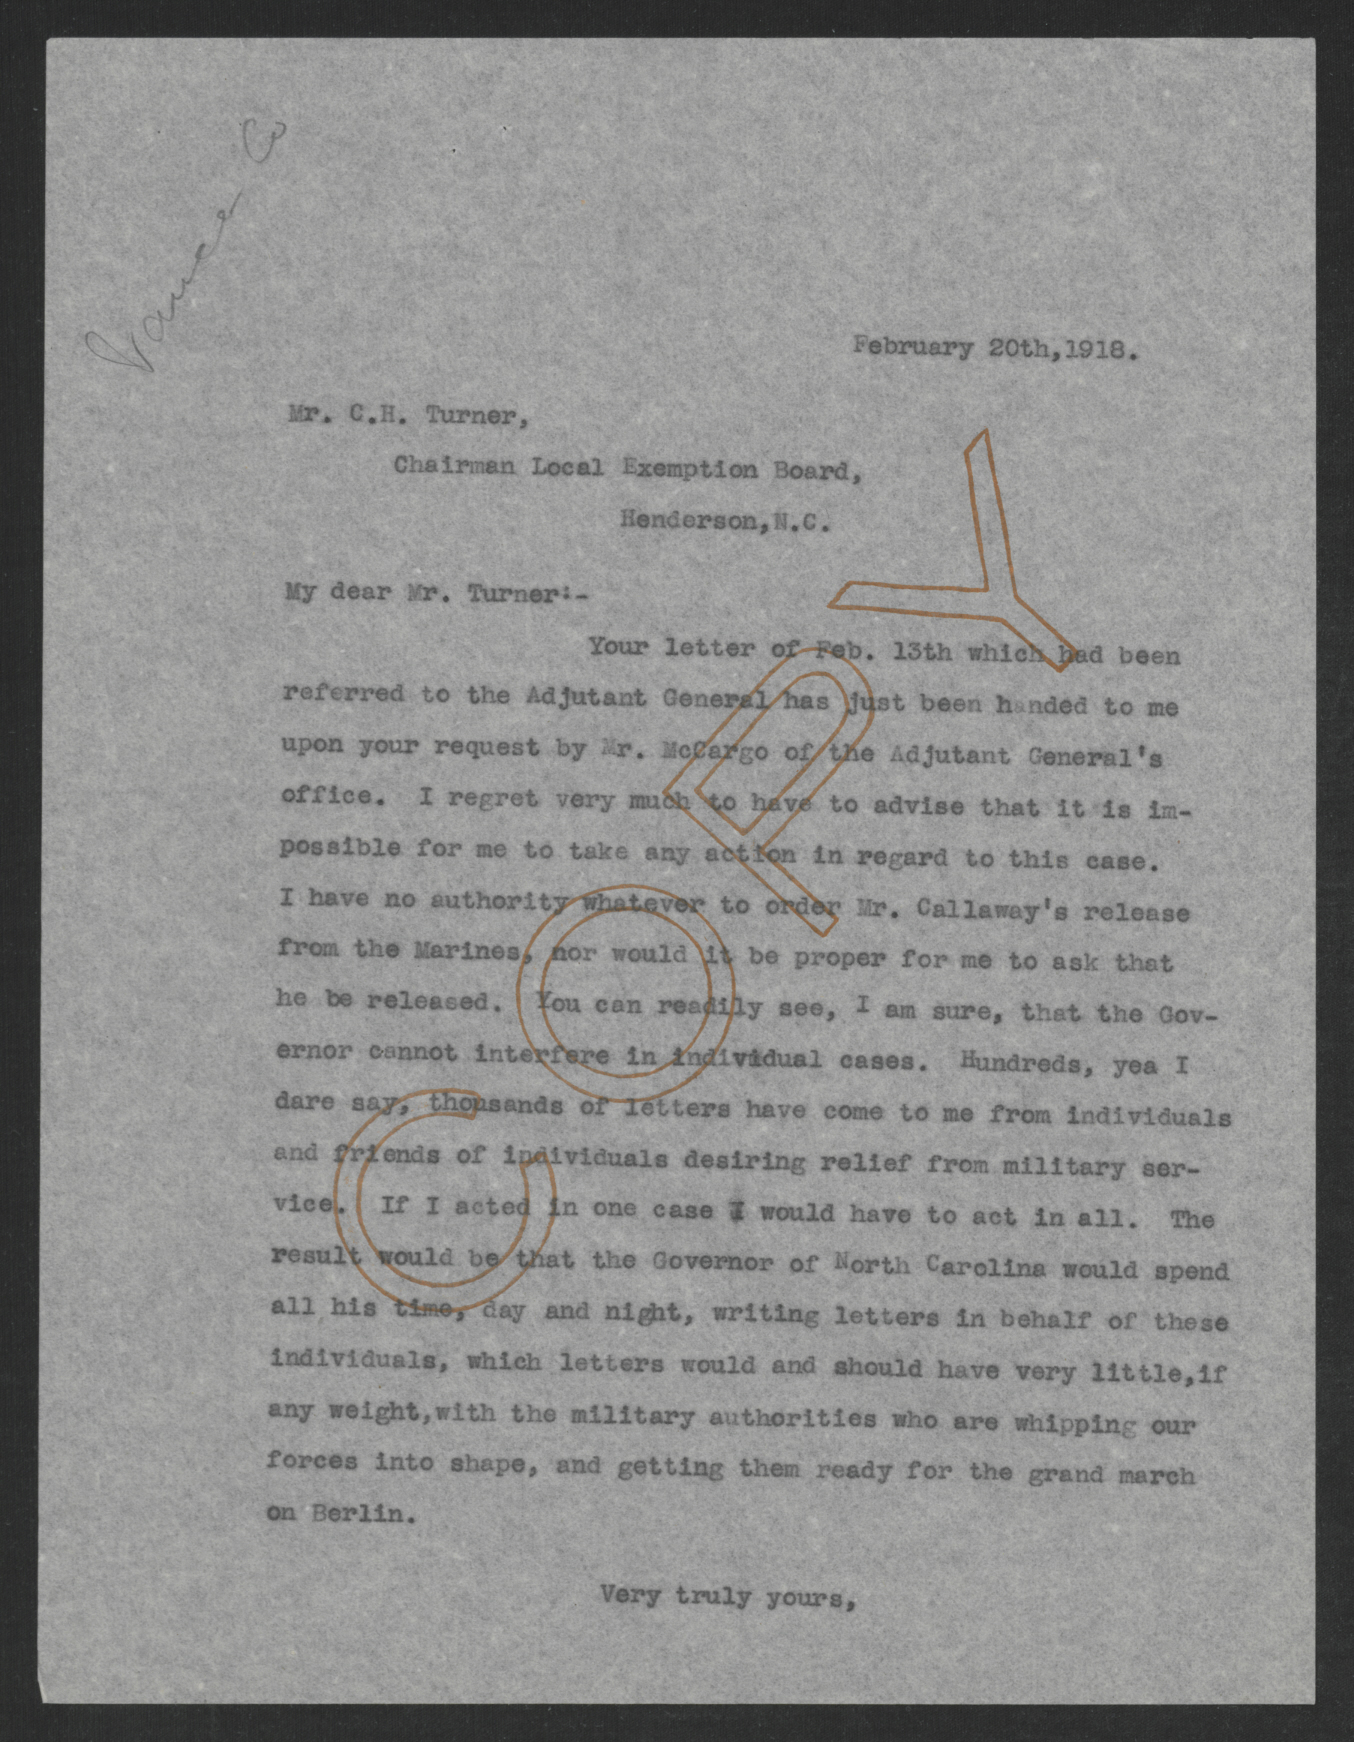 Letter from Thomas W. Bickett to Charles H. Turner, February 20, 1918